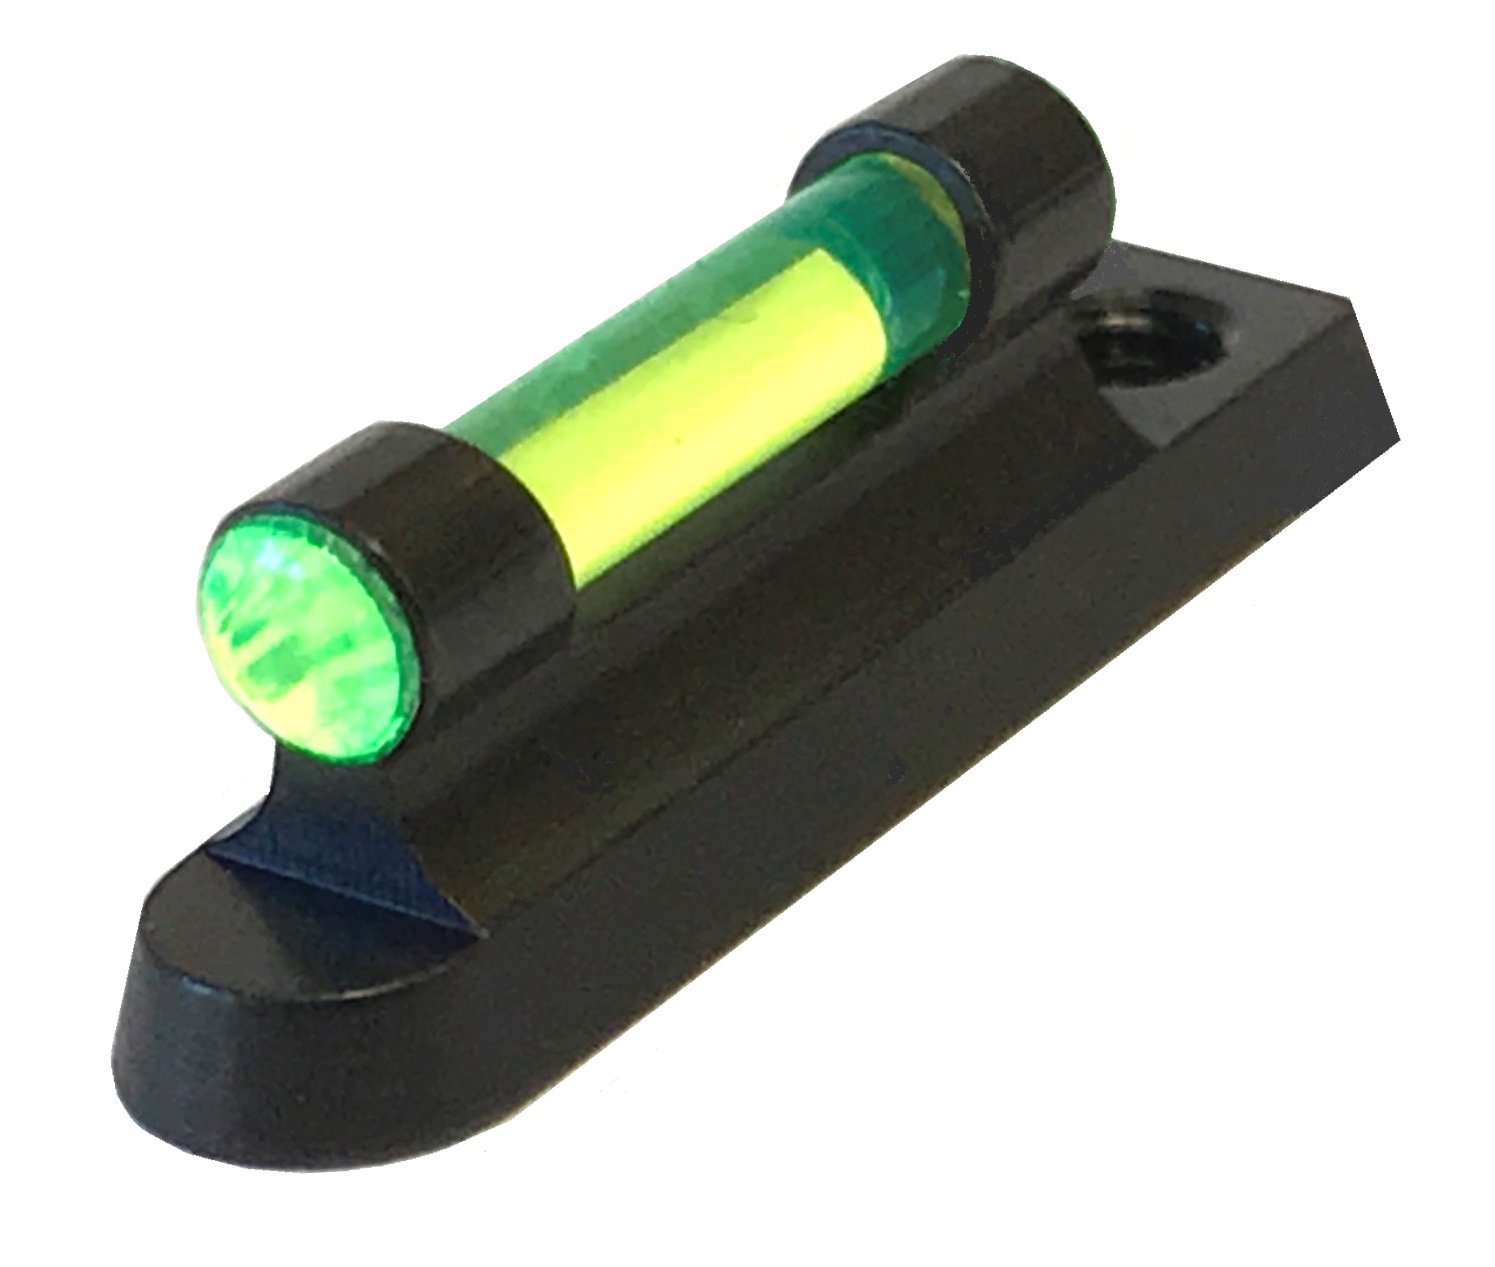 3/32" Green Fiber Optic Insert for Masterpiece and Classic Ramp - R-142-G